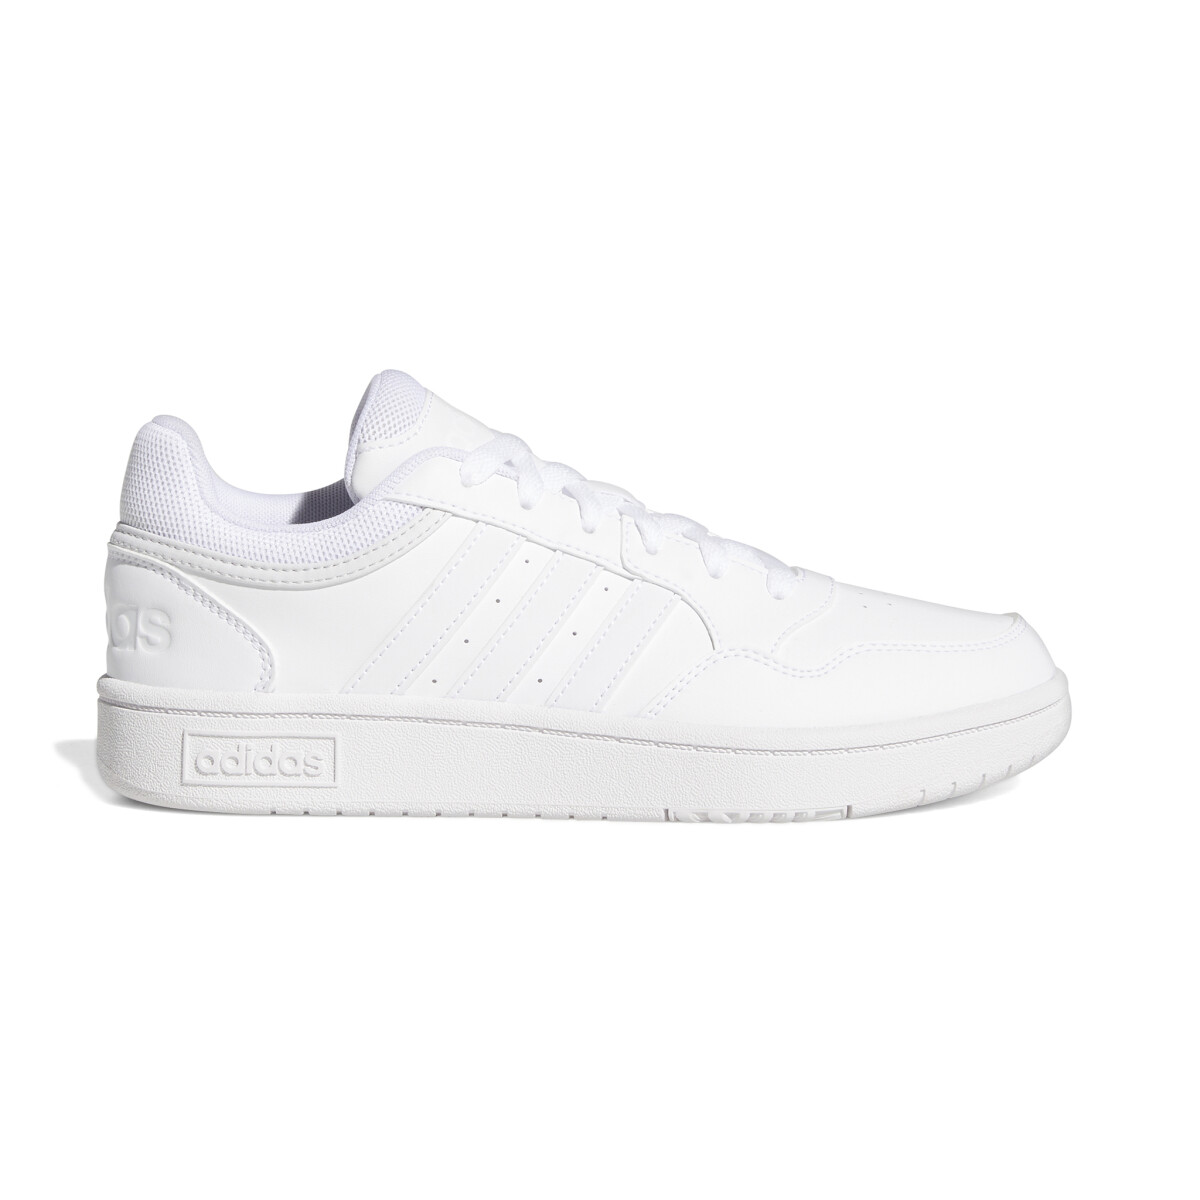 adidas HOOPS 3.0 LOW CLASSIC - WHITE 